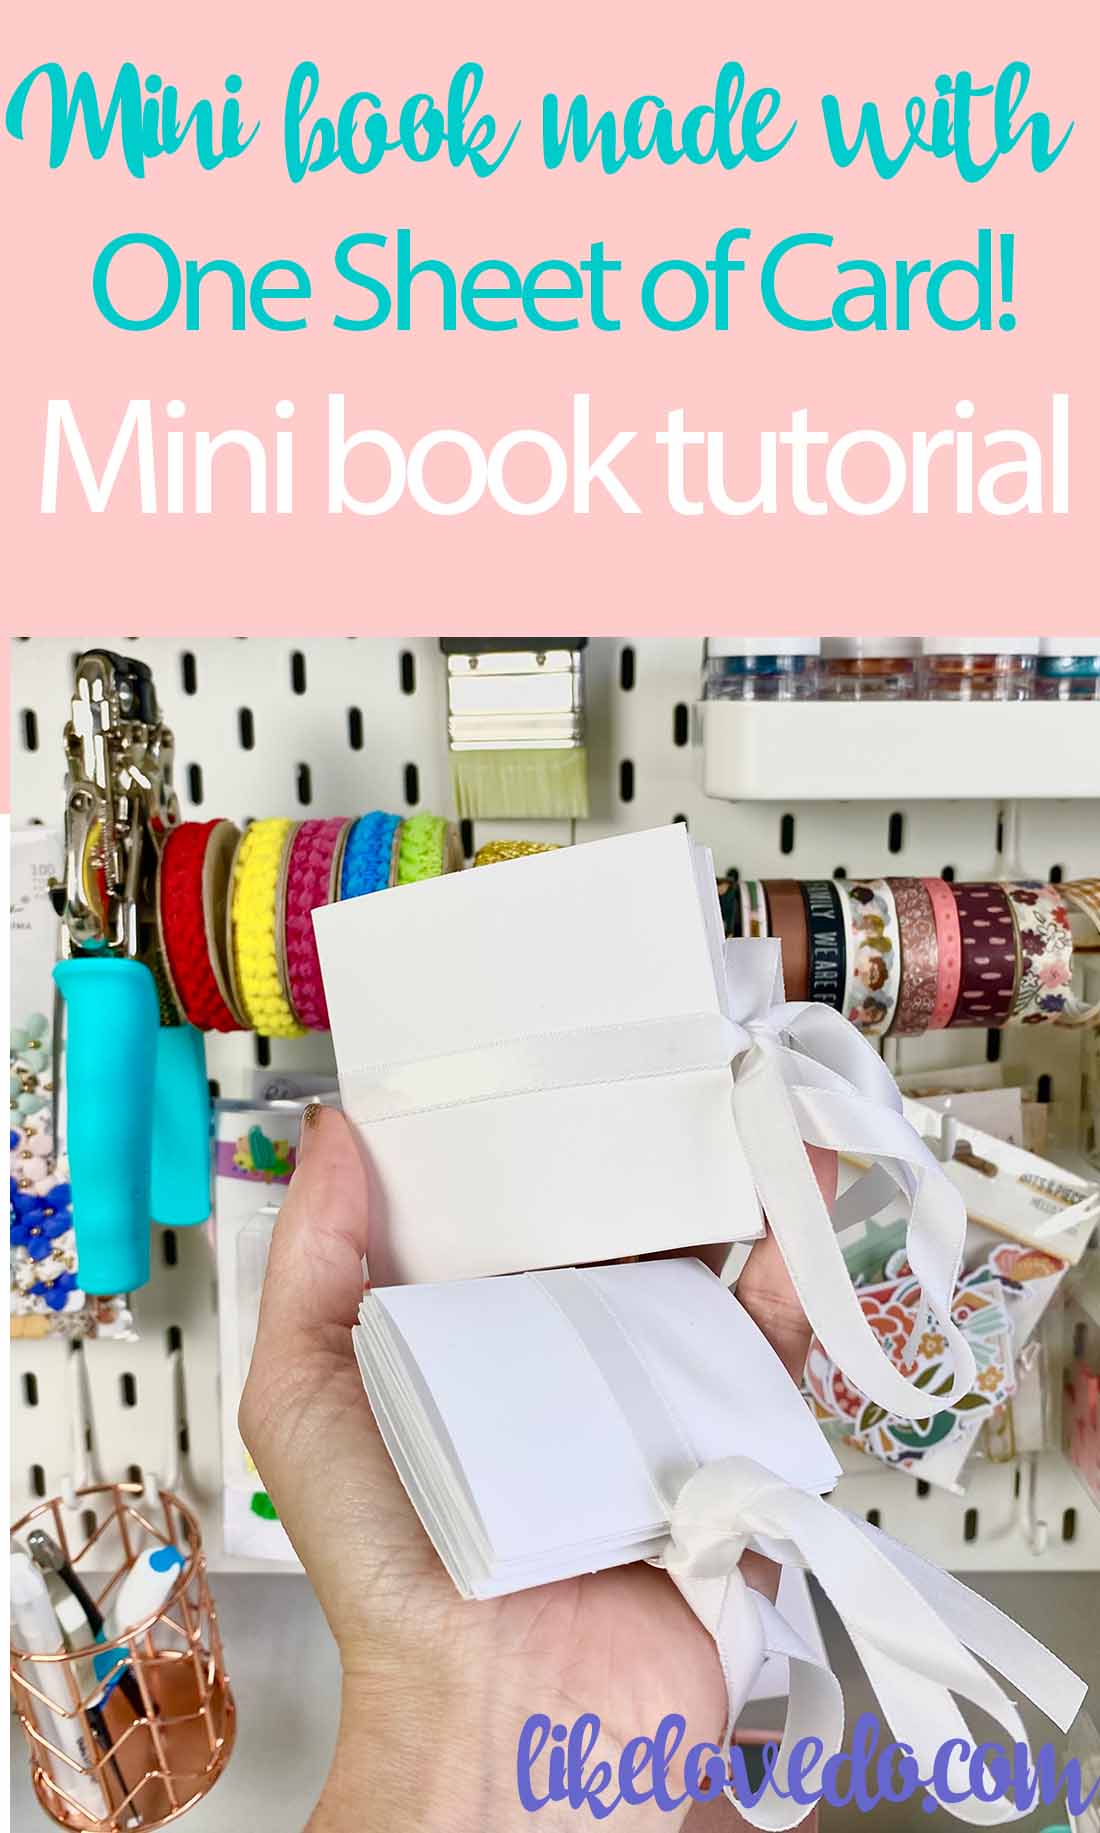  One page mini book tutorial made from one sheet of card A4 and 12 x12